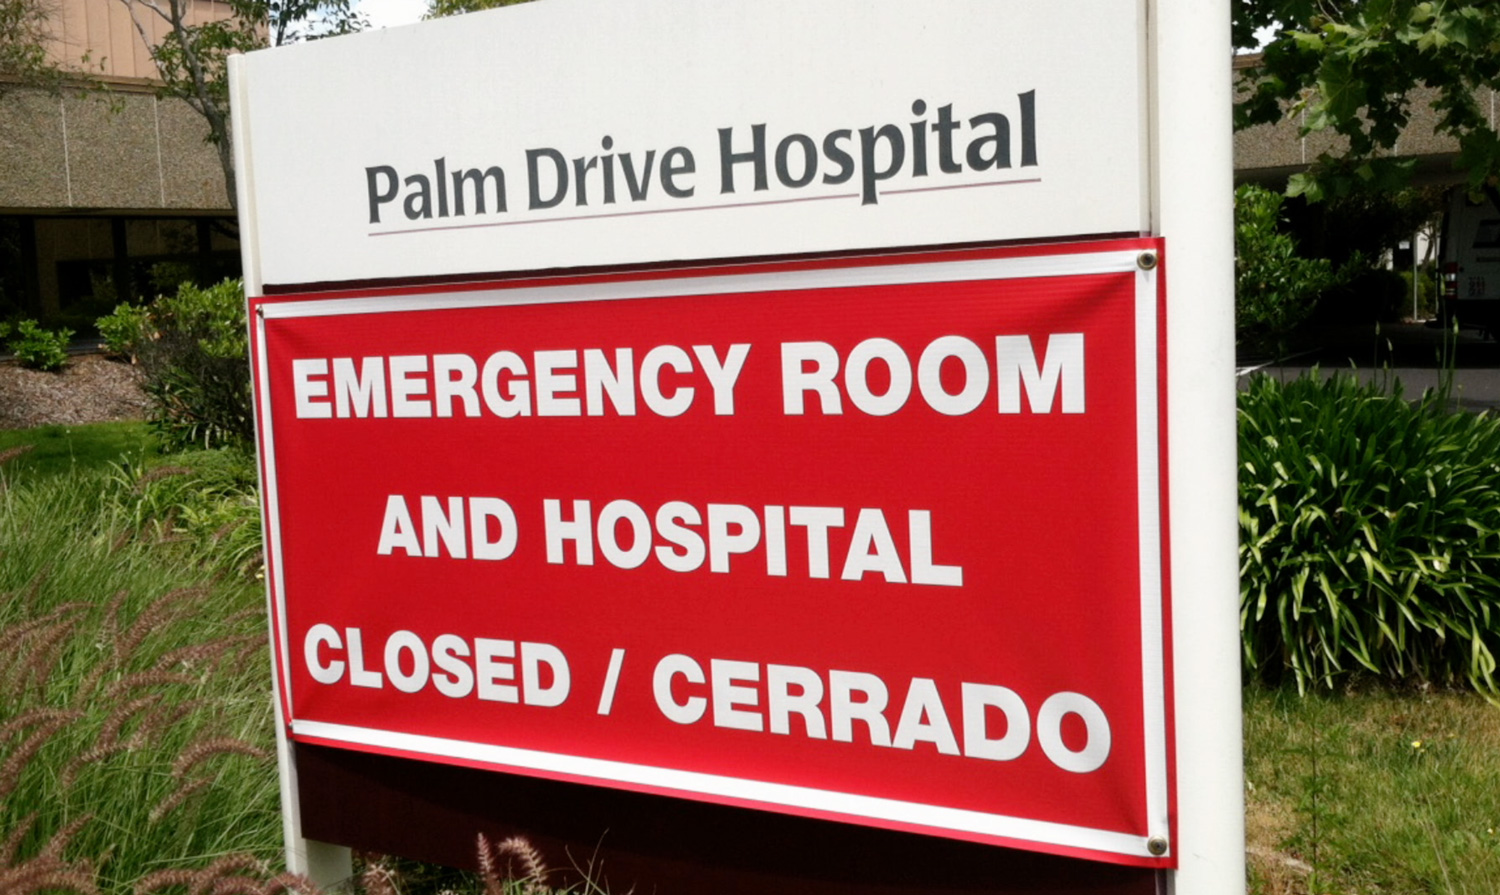 Palm Drive Hospital closed in April 2014.